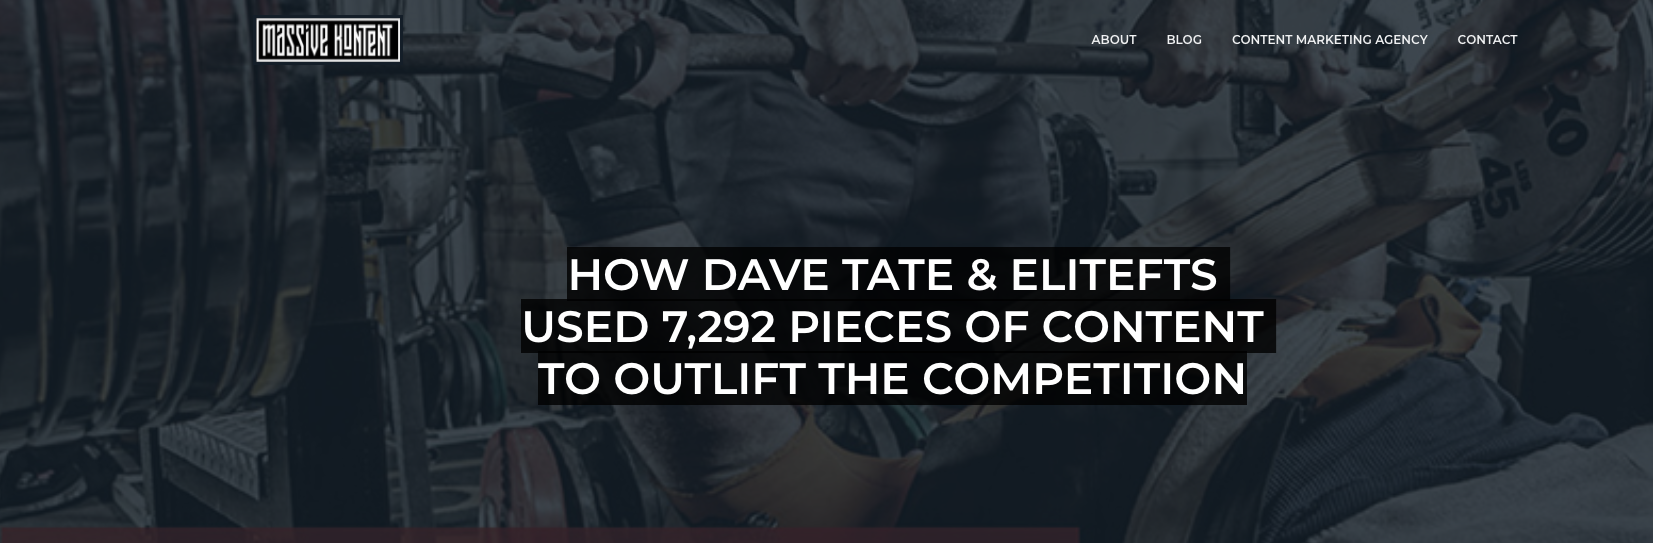 How Dave Tate and elitefts Used 7,292 Pieces of Content to Outlift the Competition 